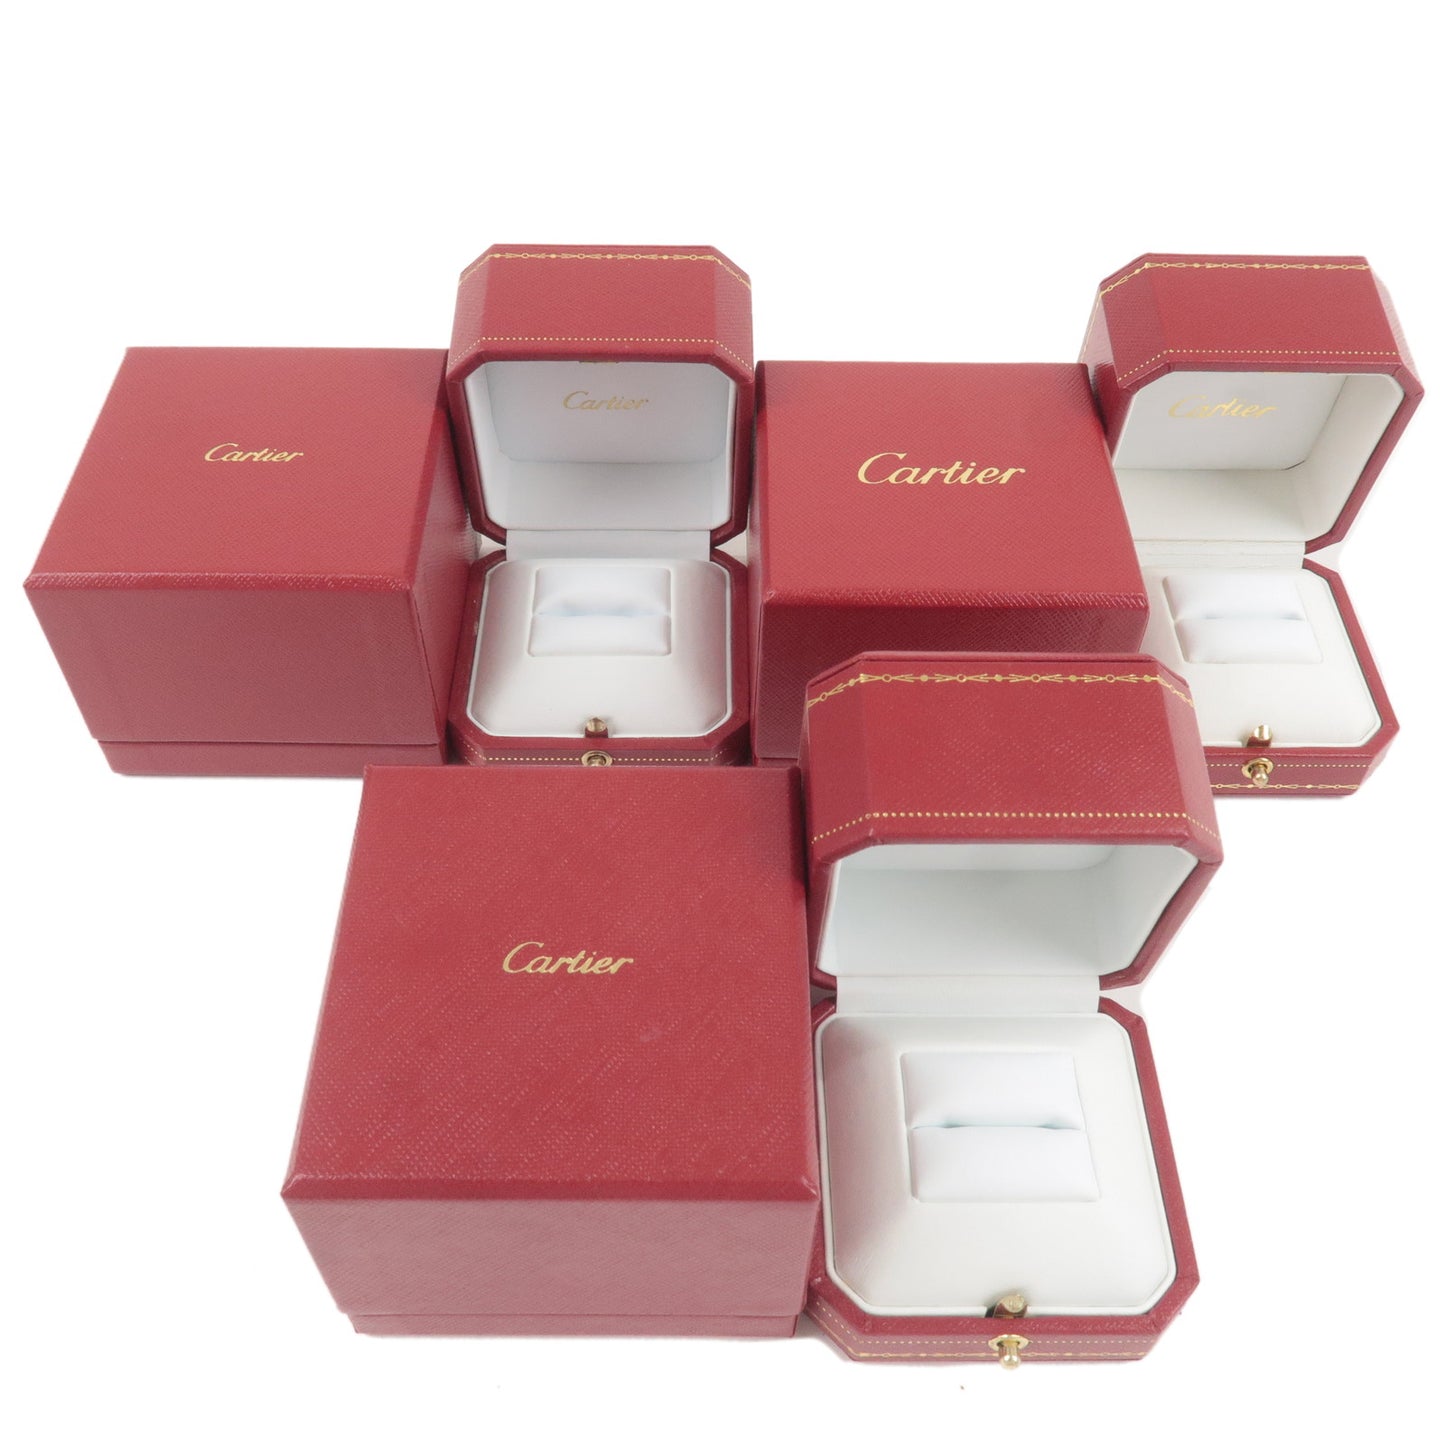 Cartier Set of 3 Ring Box Jewelry Box For Ring Red